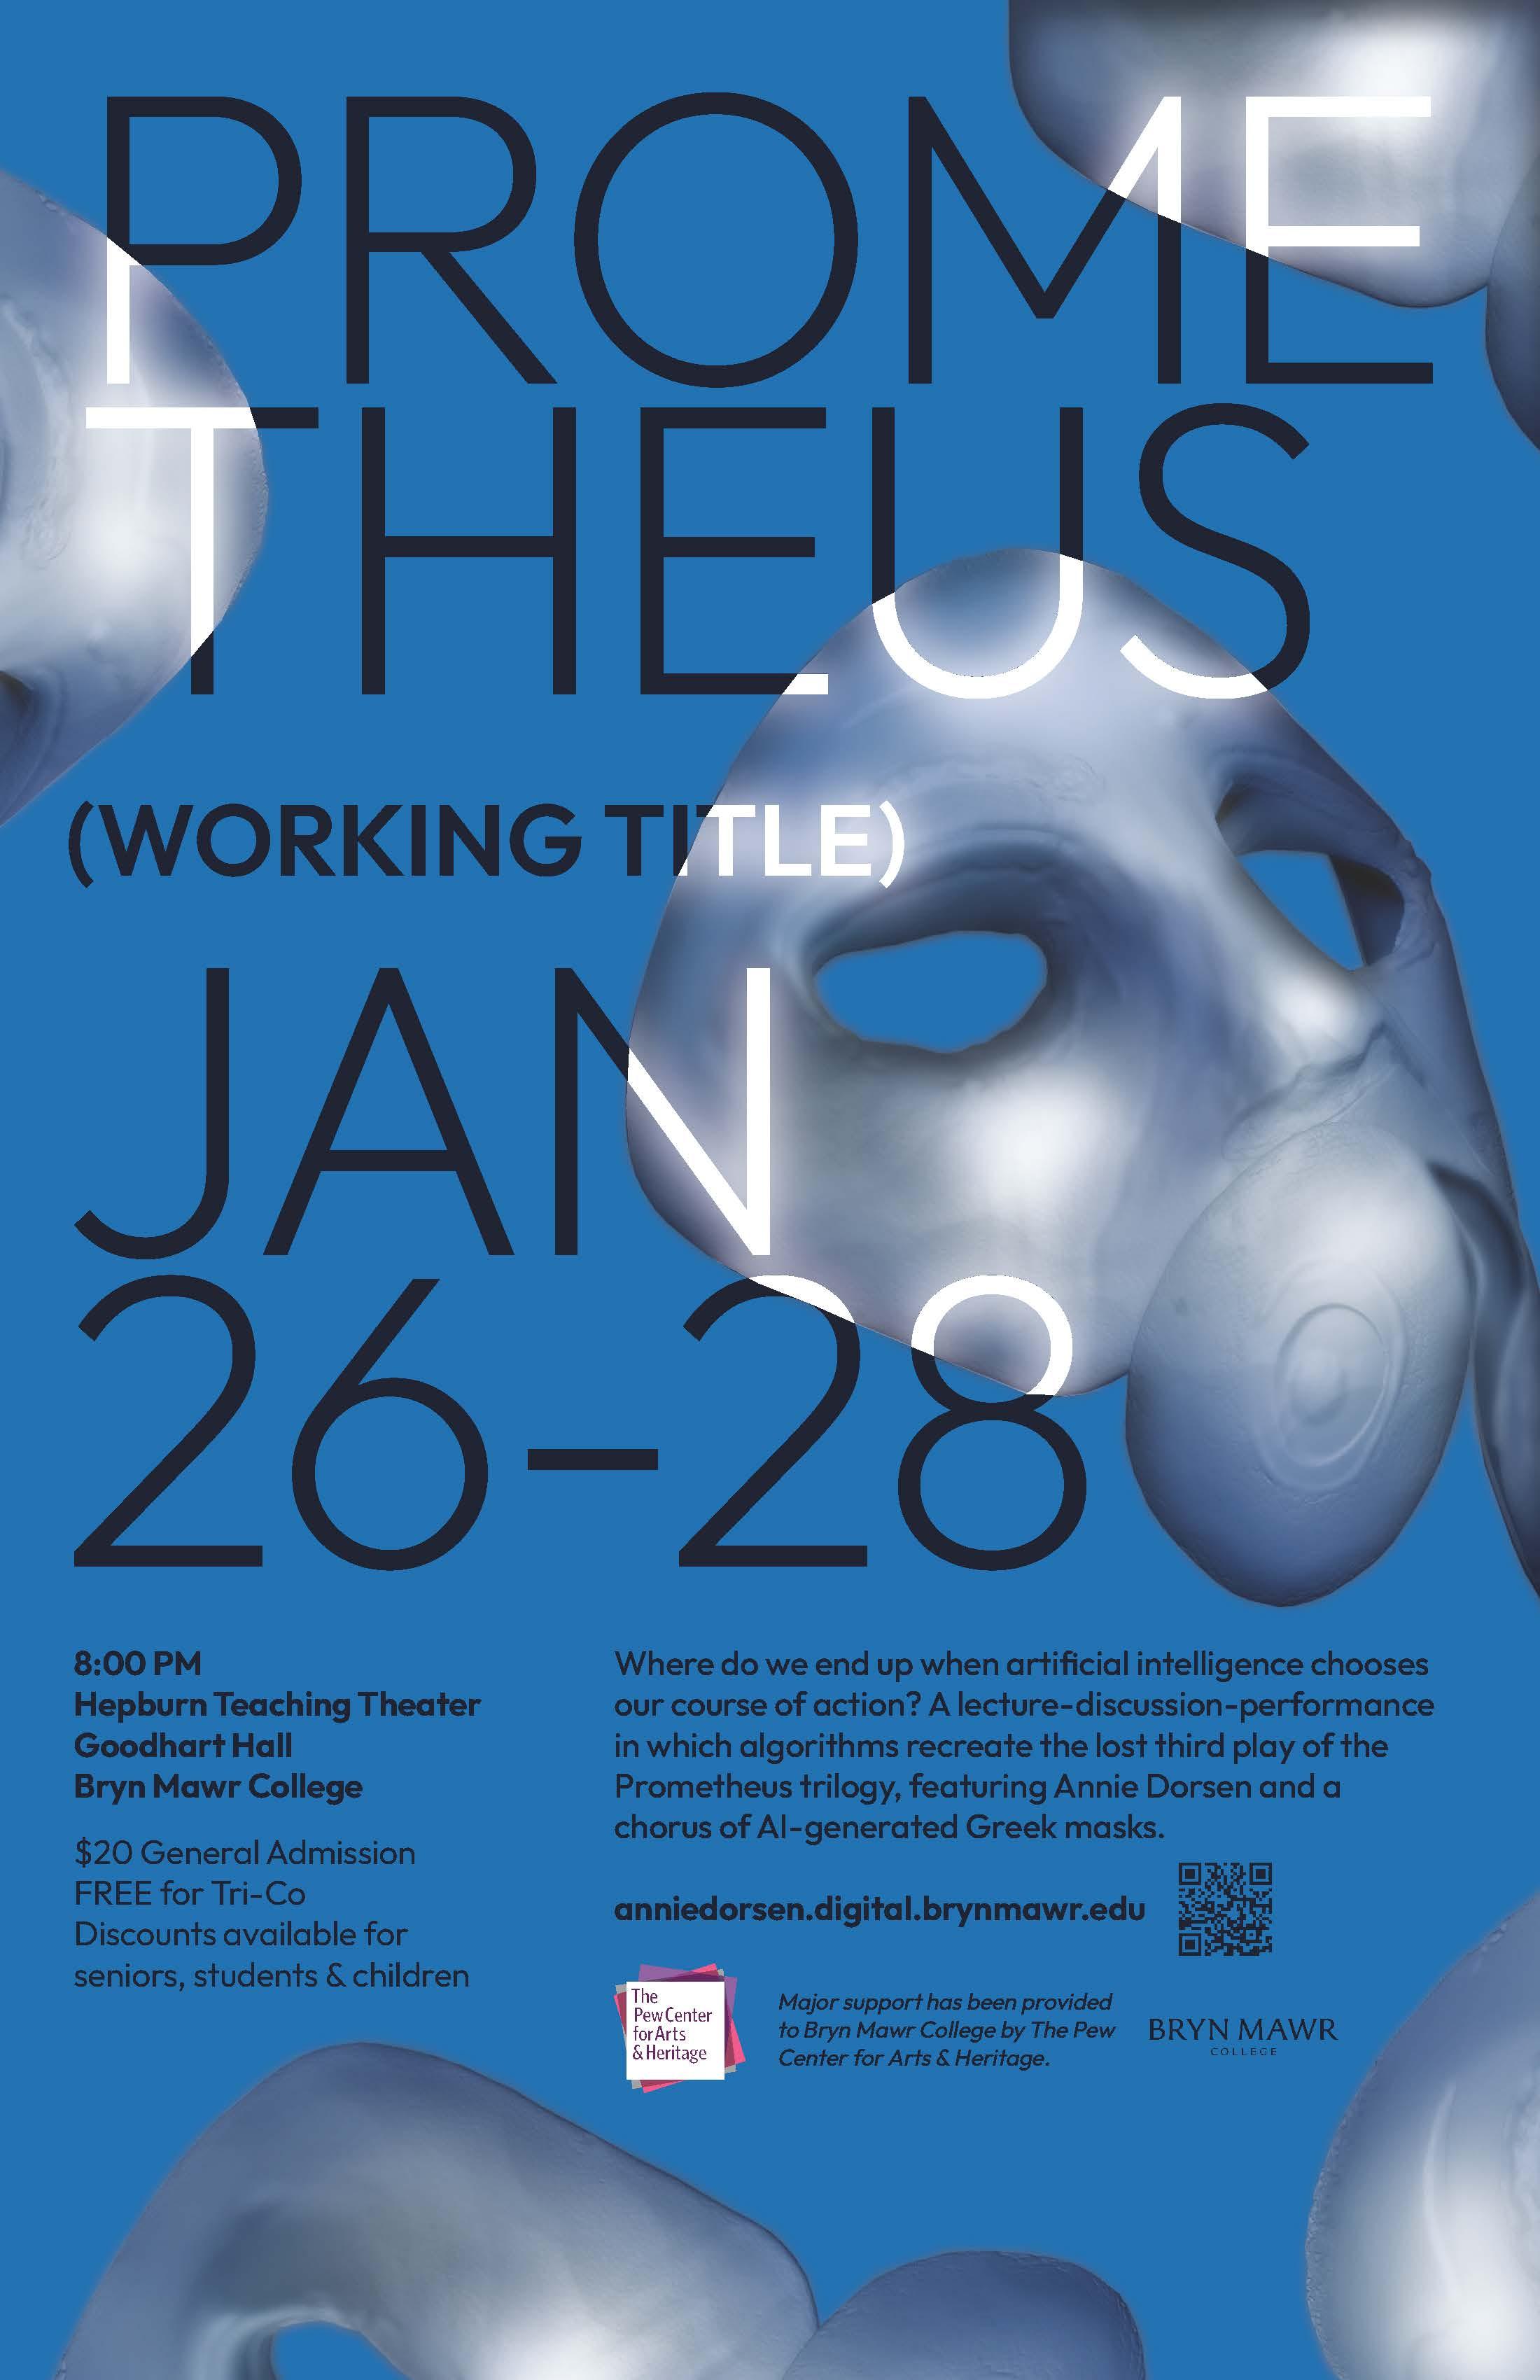 Blue background with grey 3-D mask renderings, with the text PROMETHEUS (working title) and JAN 26-28